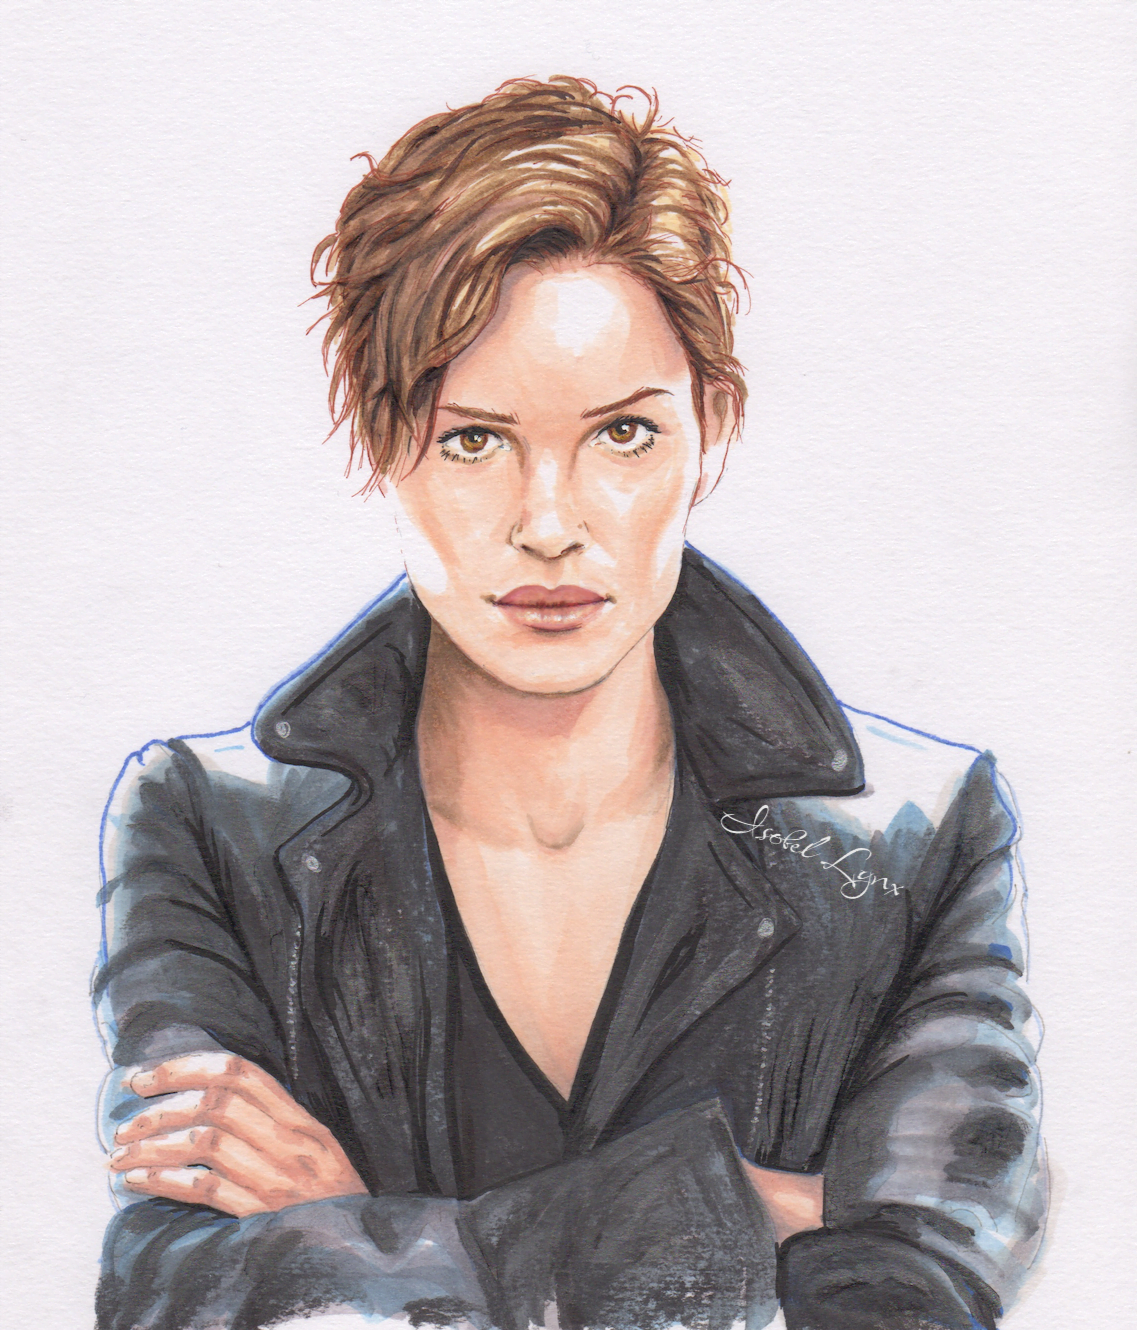 marker drawing of a woman with short hair, wearing a black leather jacket, signed by Isobel Lynx